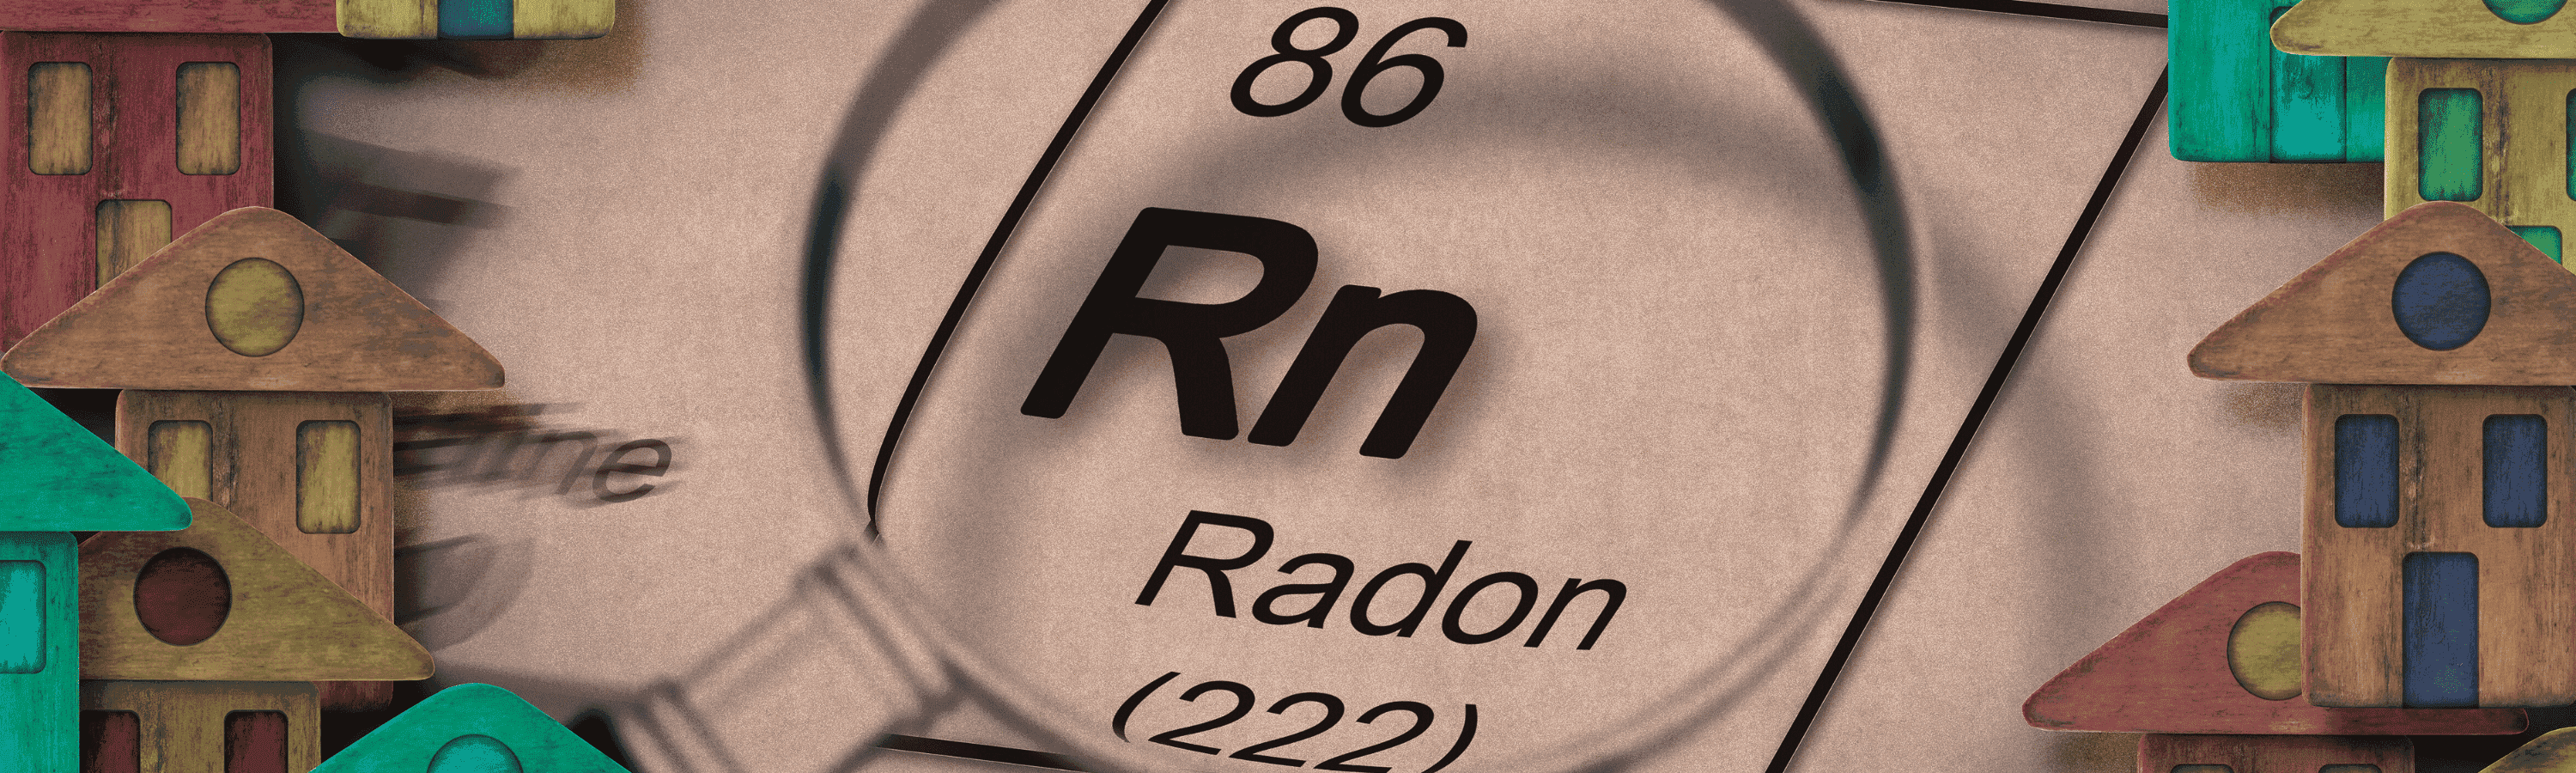 Radon in house featured image